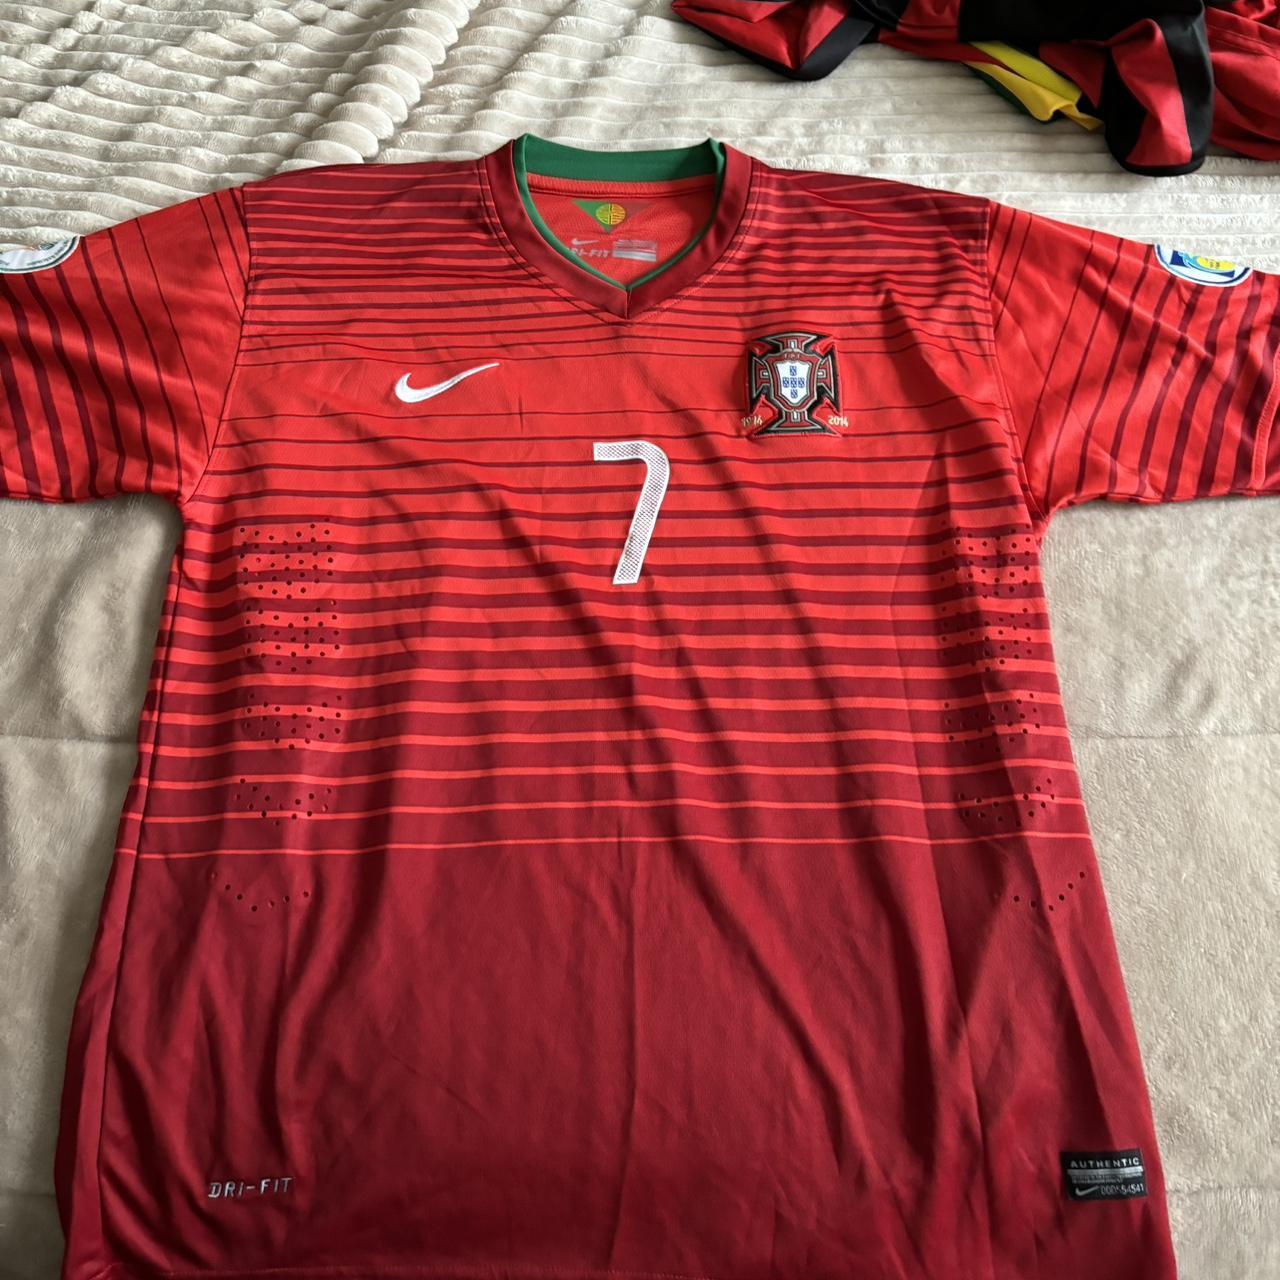 portugal jersey 2014 world cup